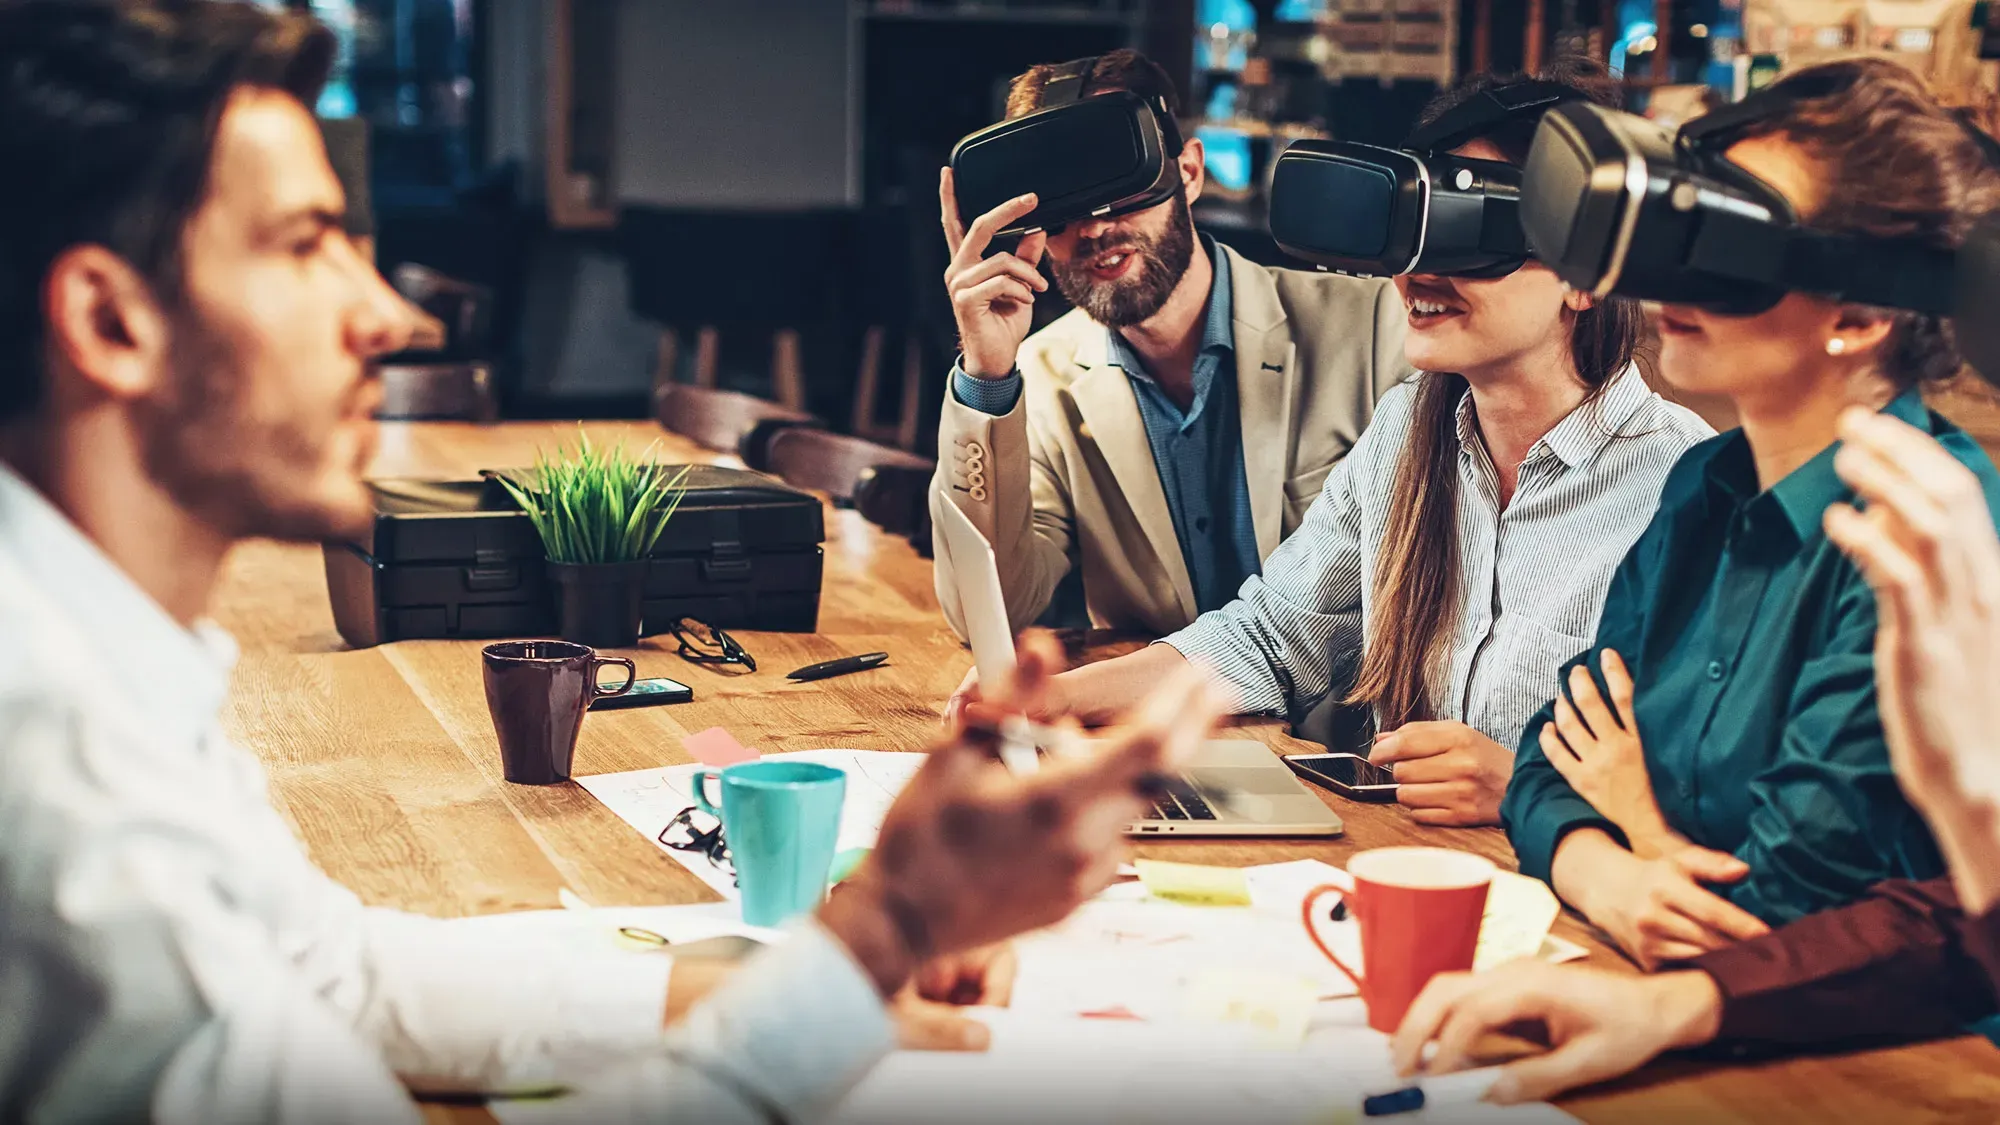 Using VR to Recruit and Retain New Generation Employees